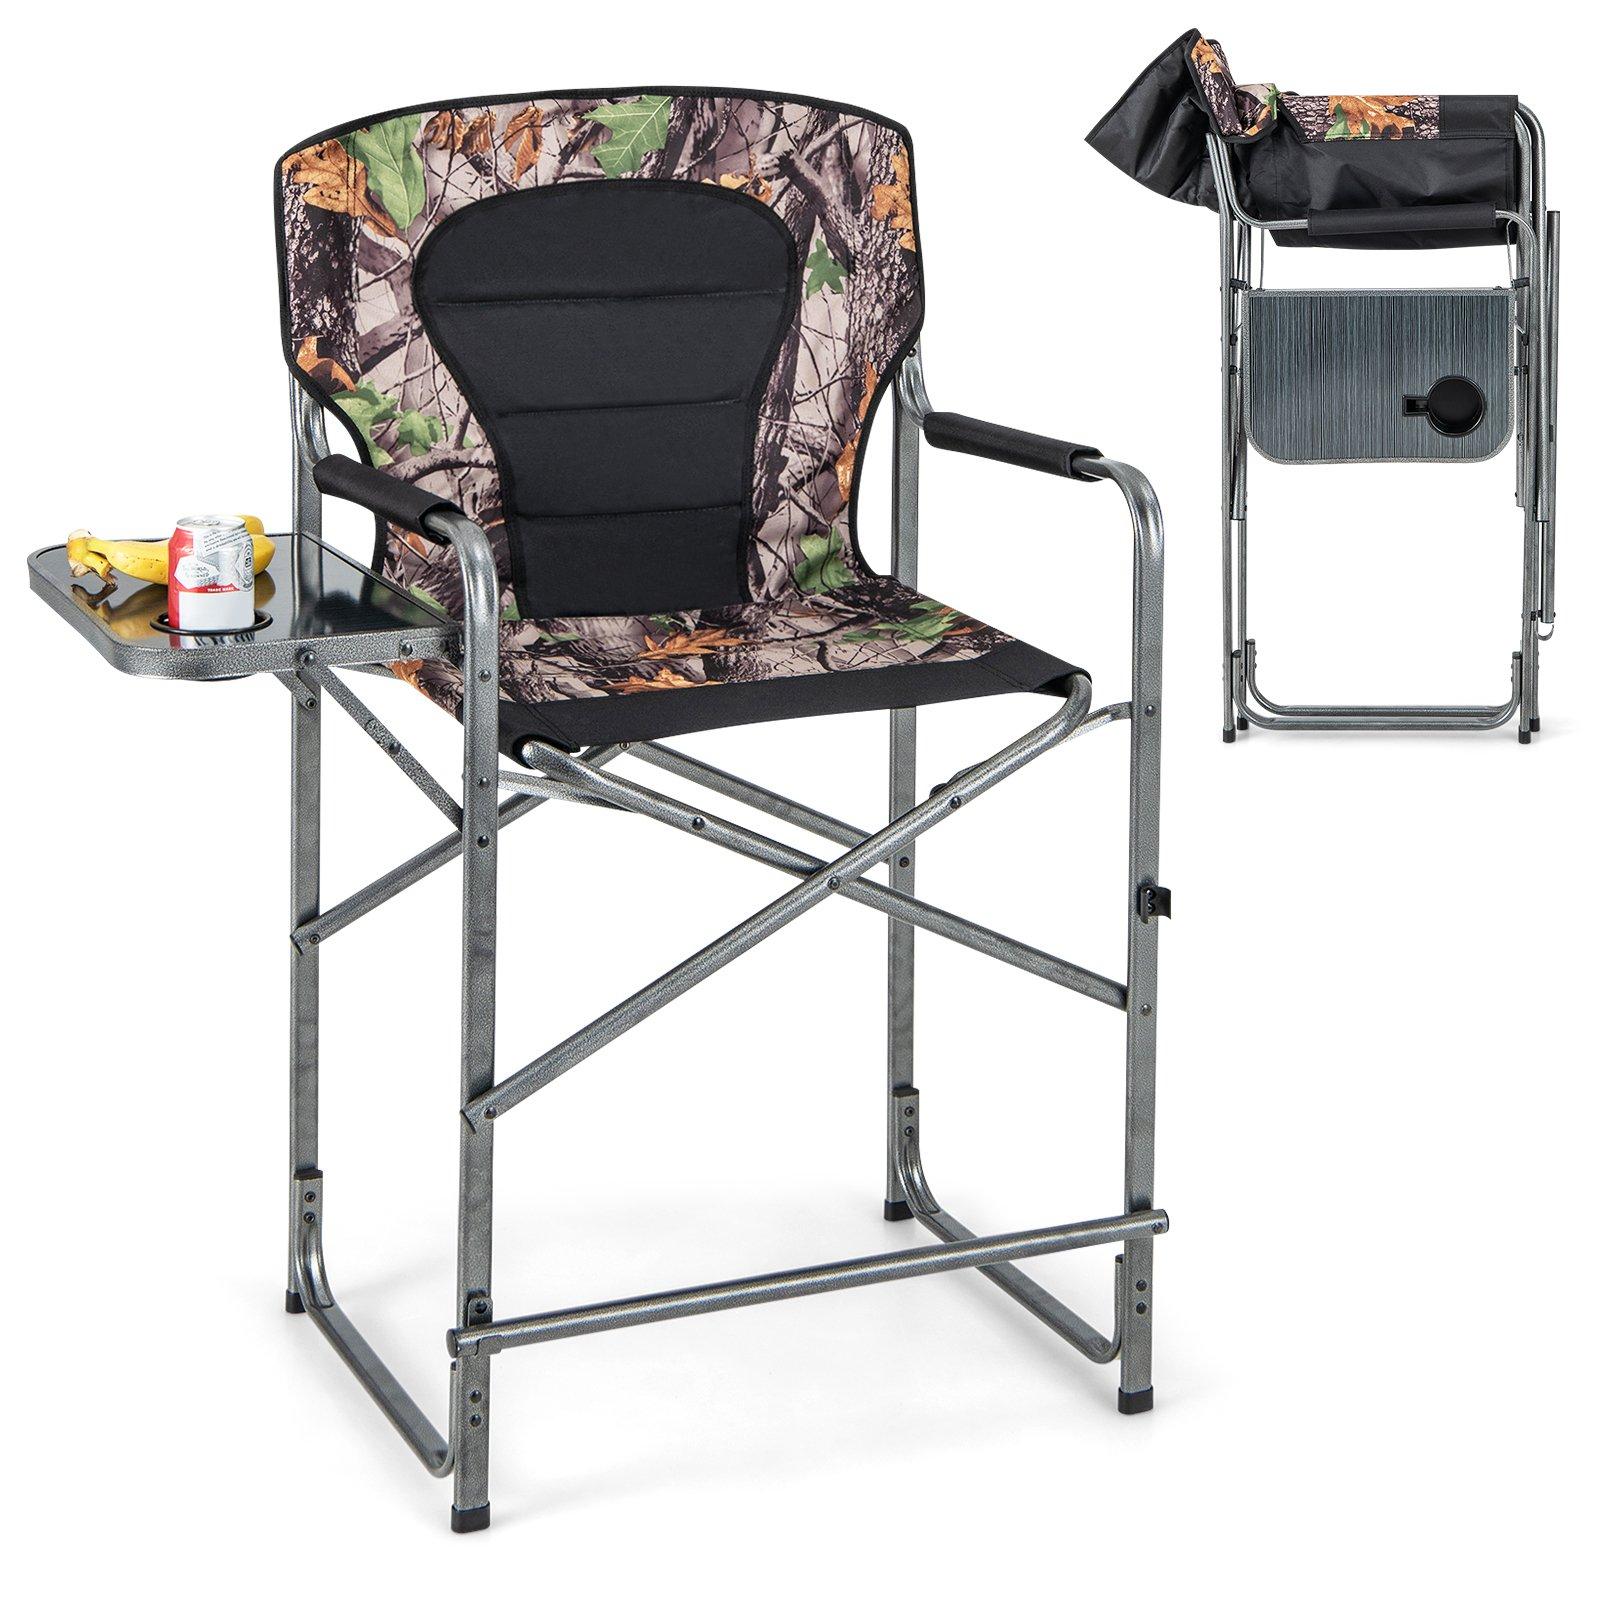 Tall Hunting Chair Folding Oversized Director Chair w/ Side Table Portable Camping Chair